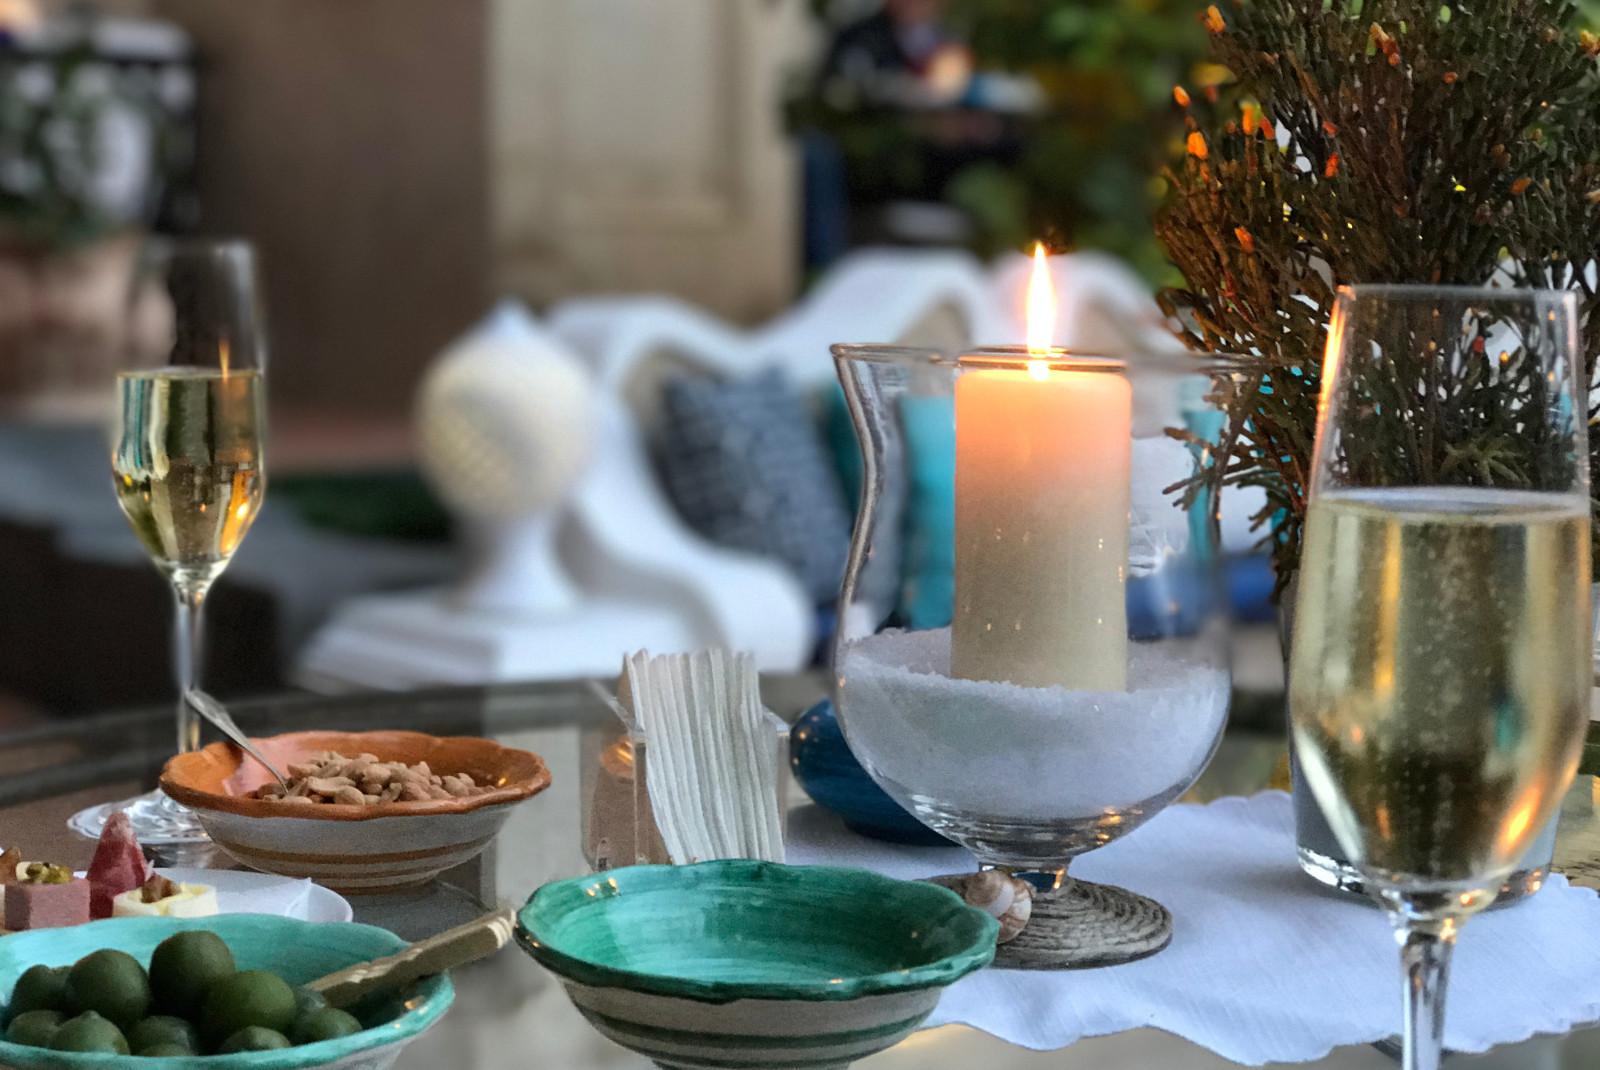 Two glasses of wine, candle and bowl of olives on table in Positano